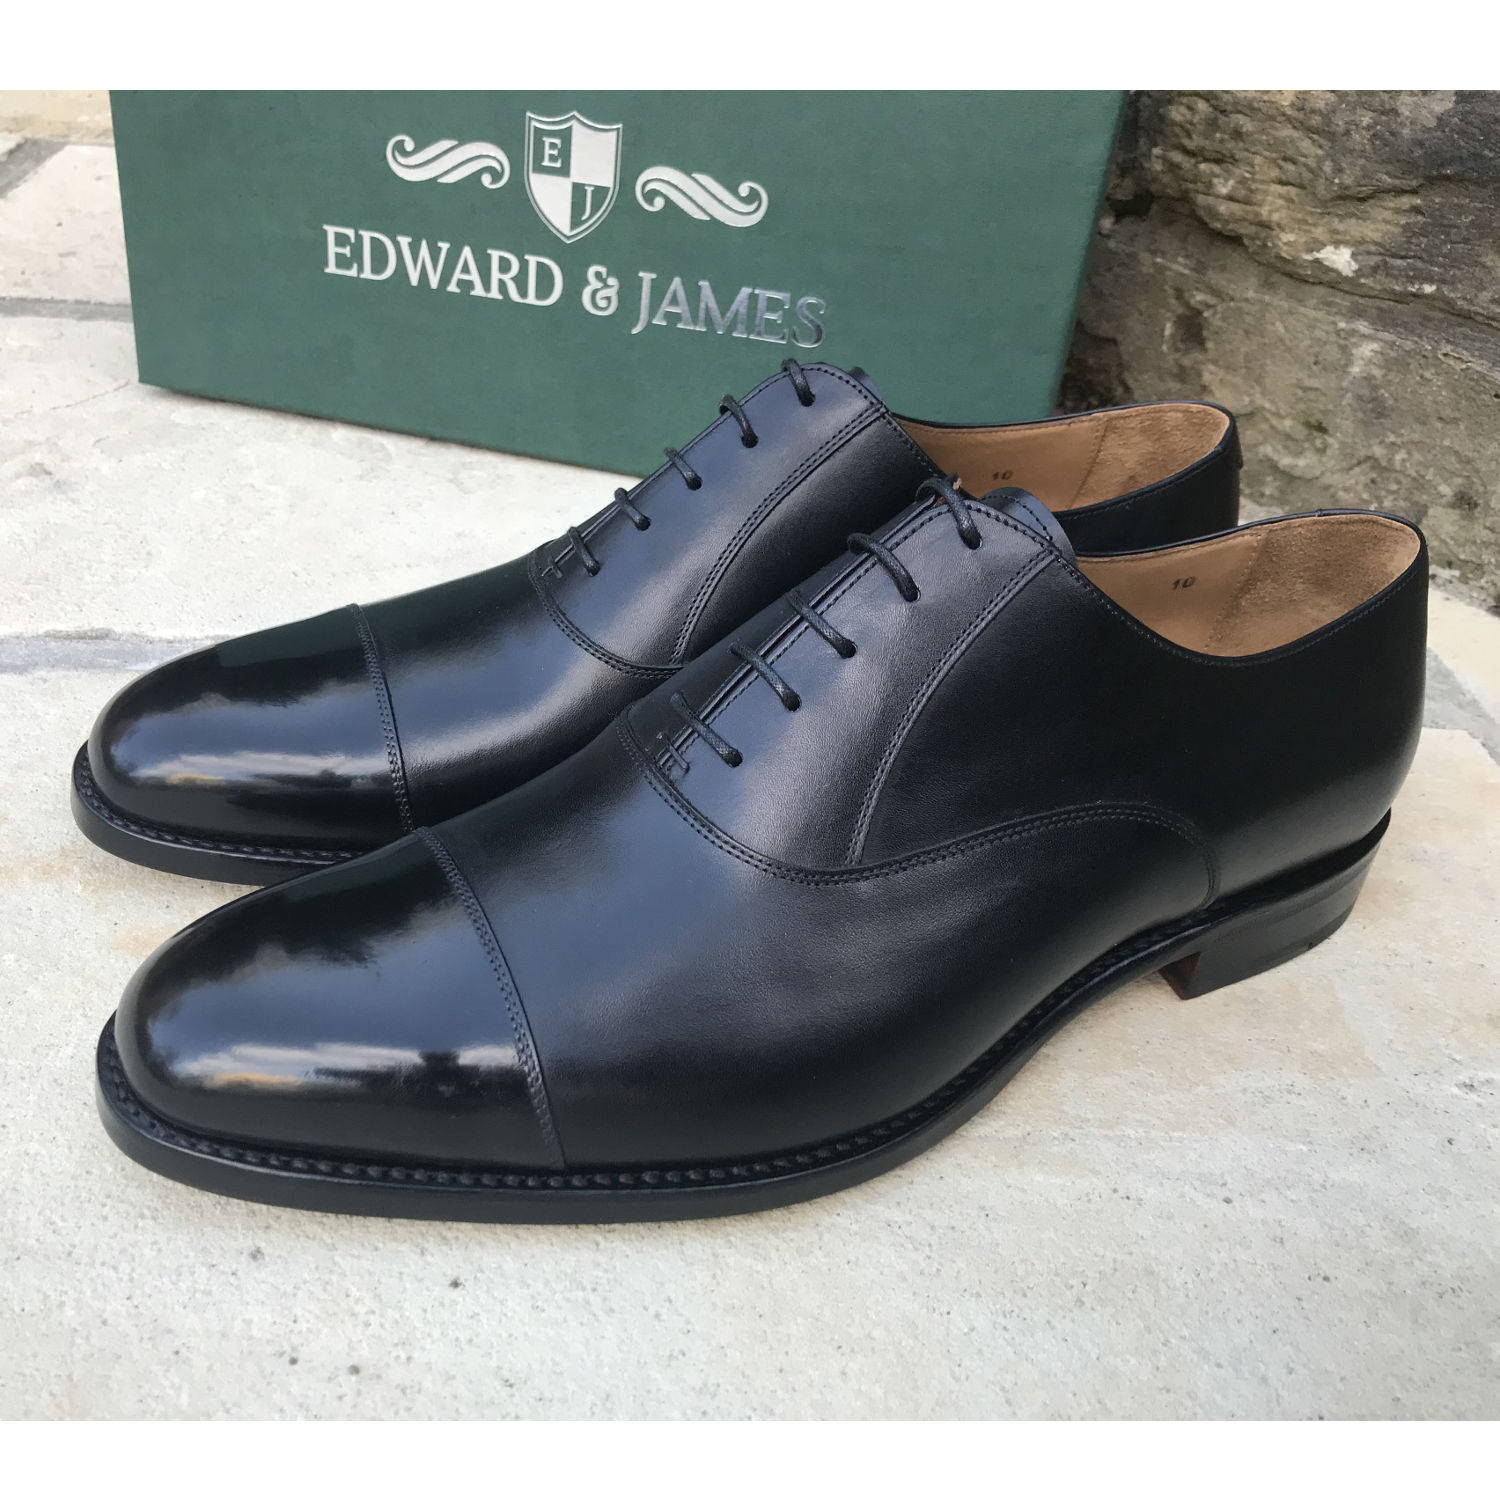 Edward & James: A Shoe for All Time